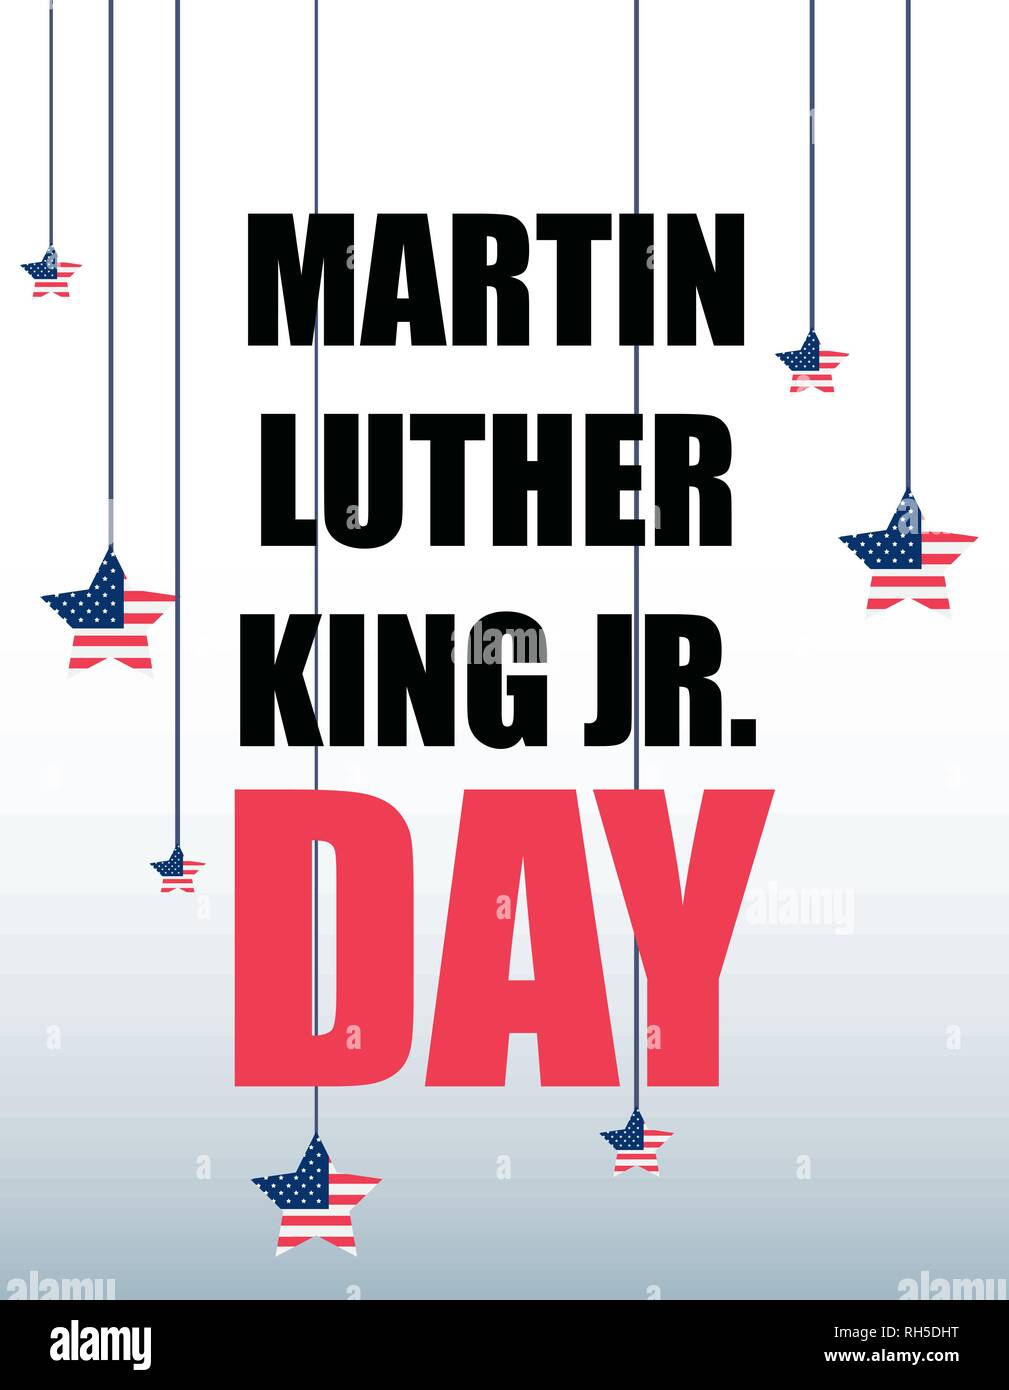 martin luther king jr day poster vector illustration Stock Vector Image ...